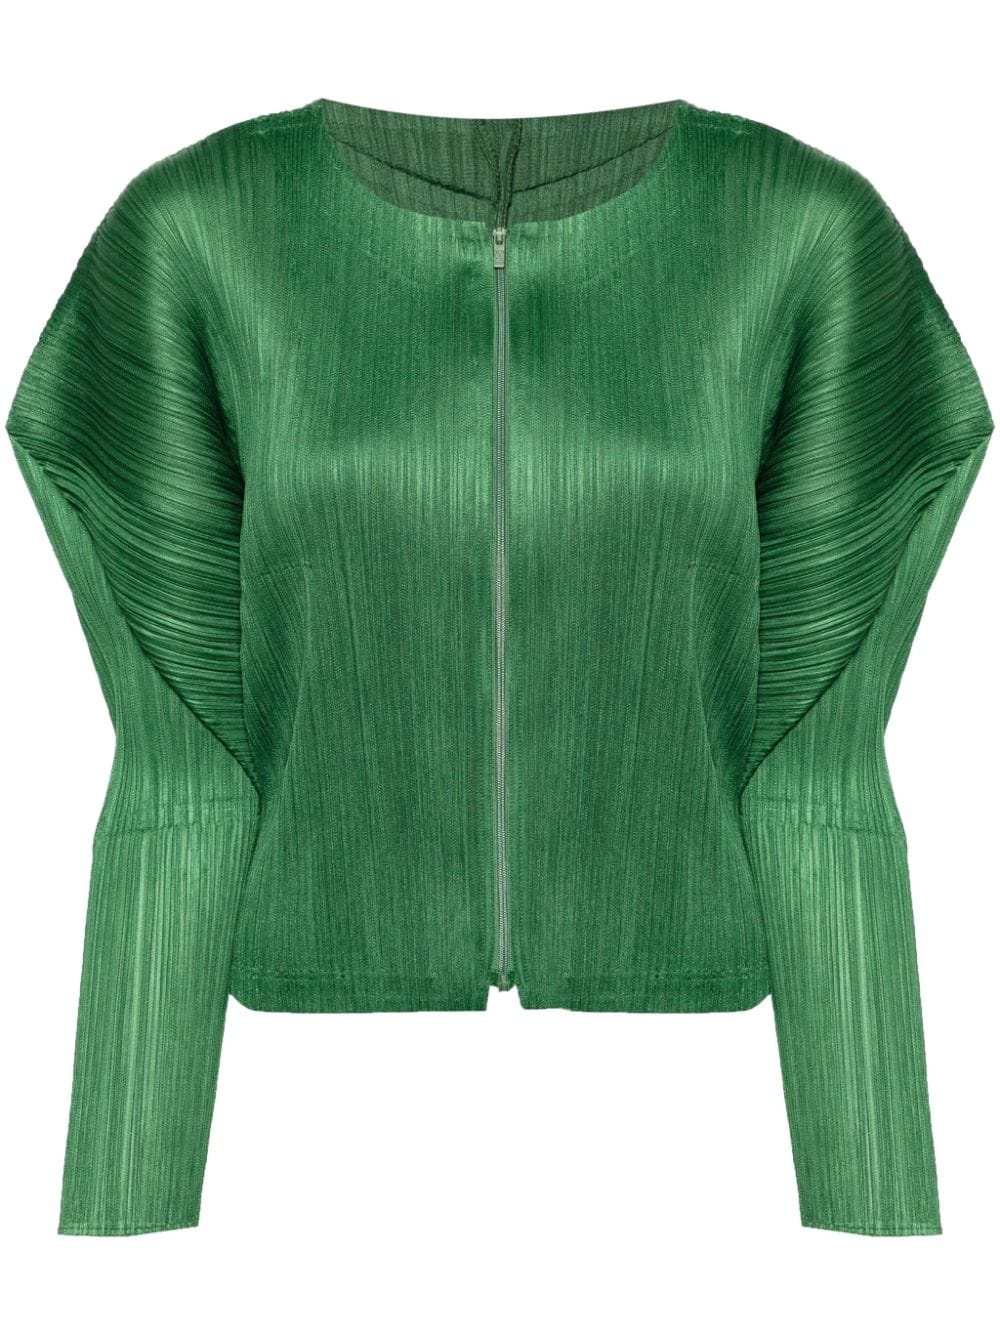 Pleats Please Issey Miyake February pinched-shoulder pleated jacket - Green von Pleats Please Issey Miyake